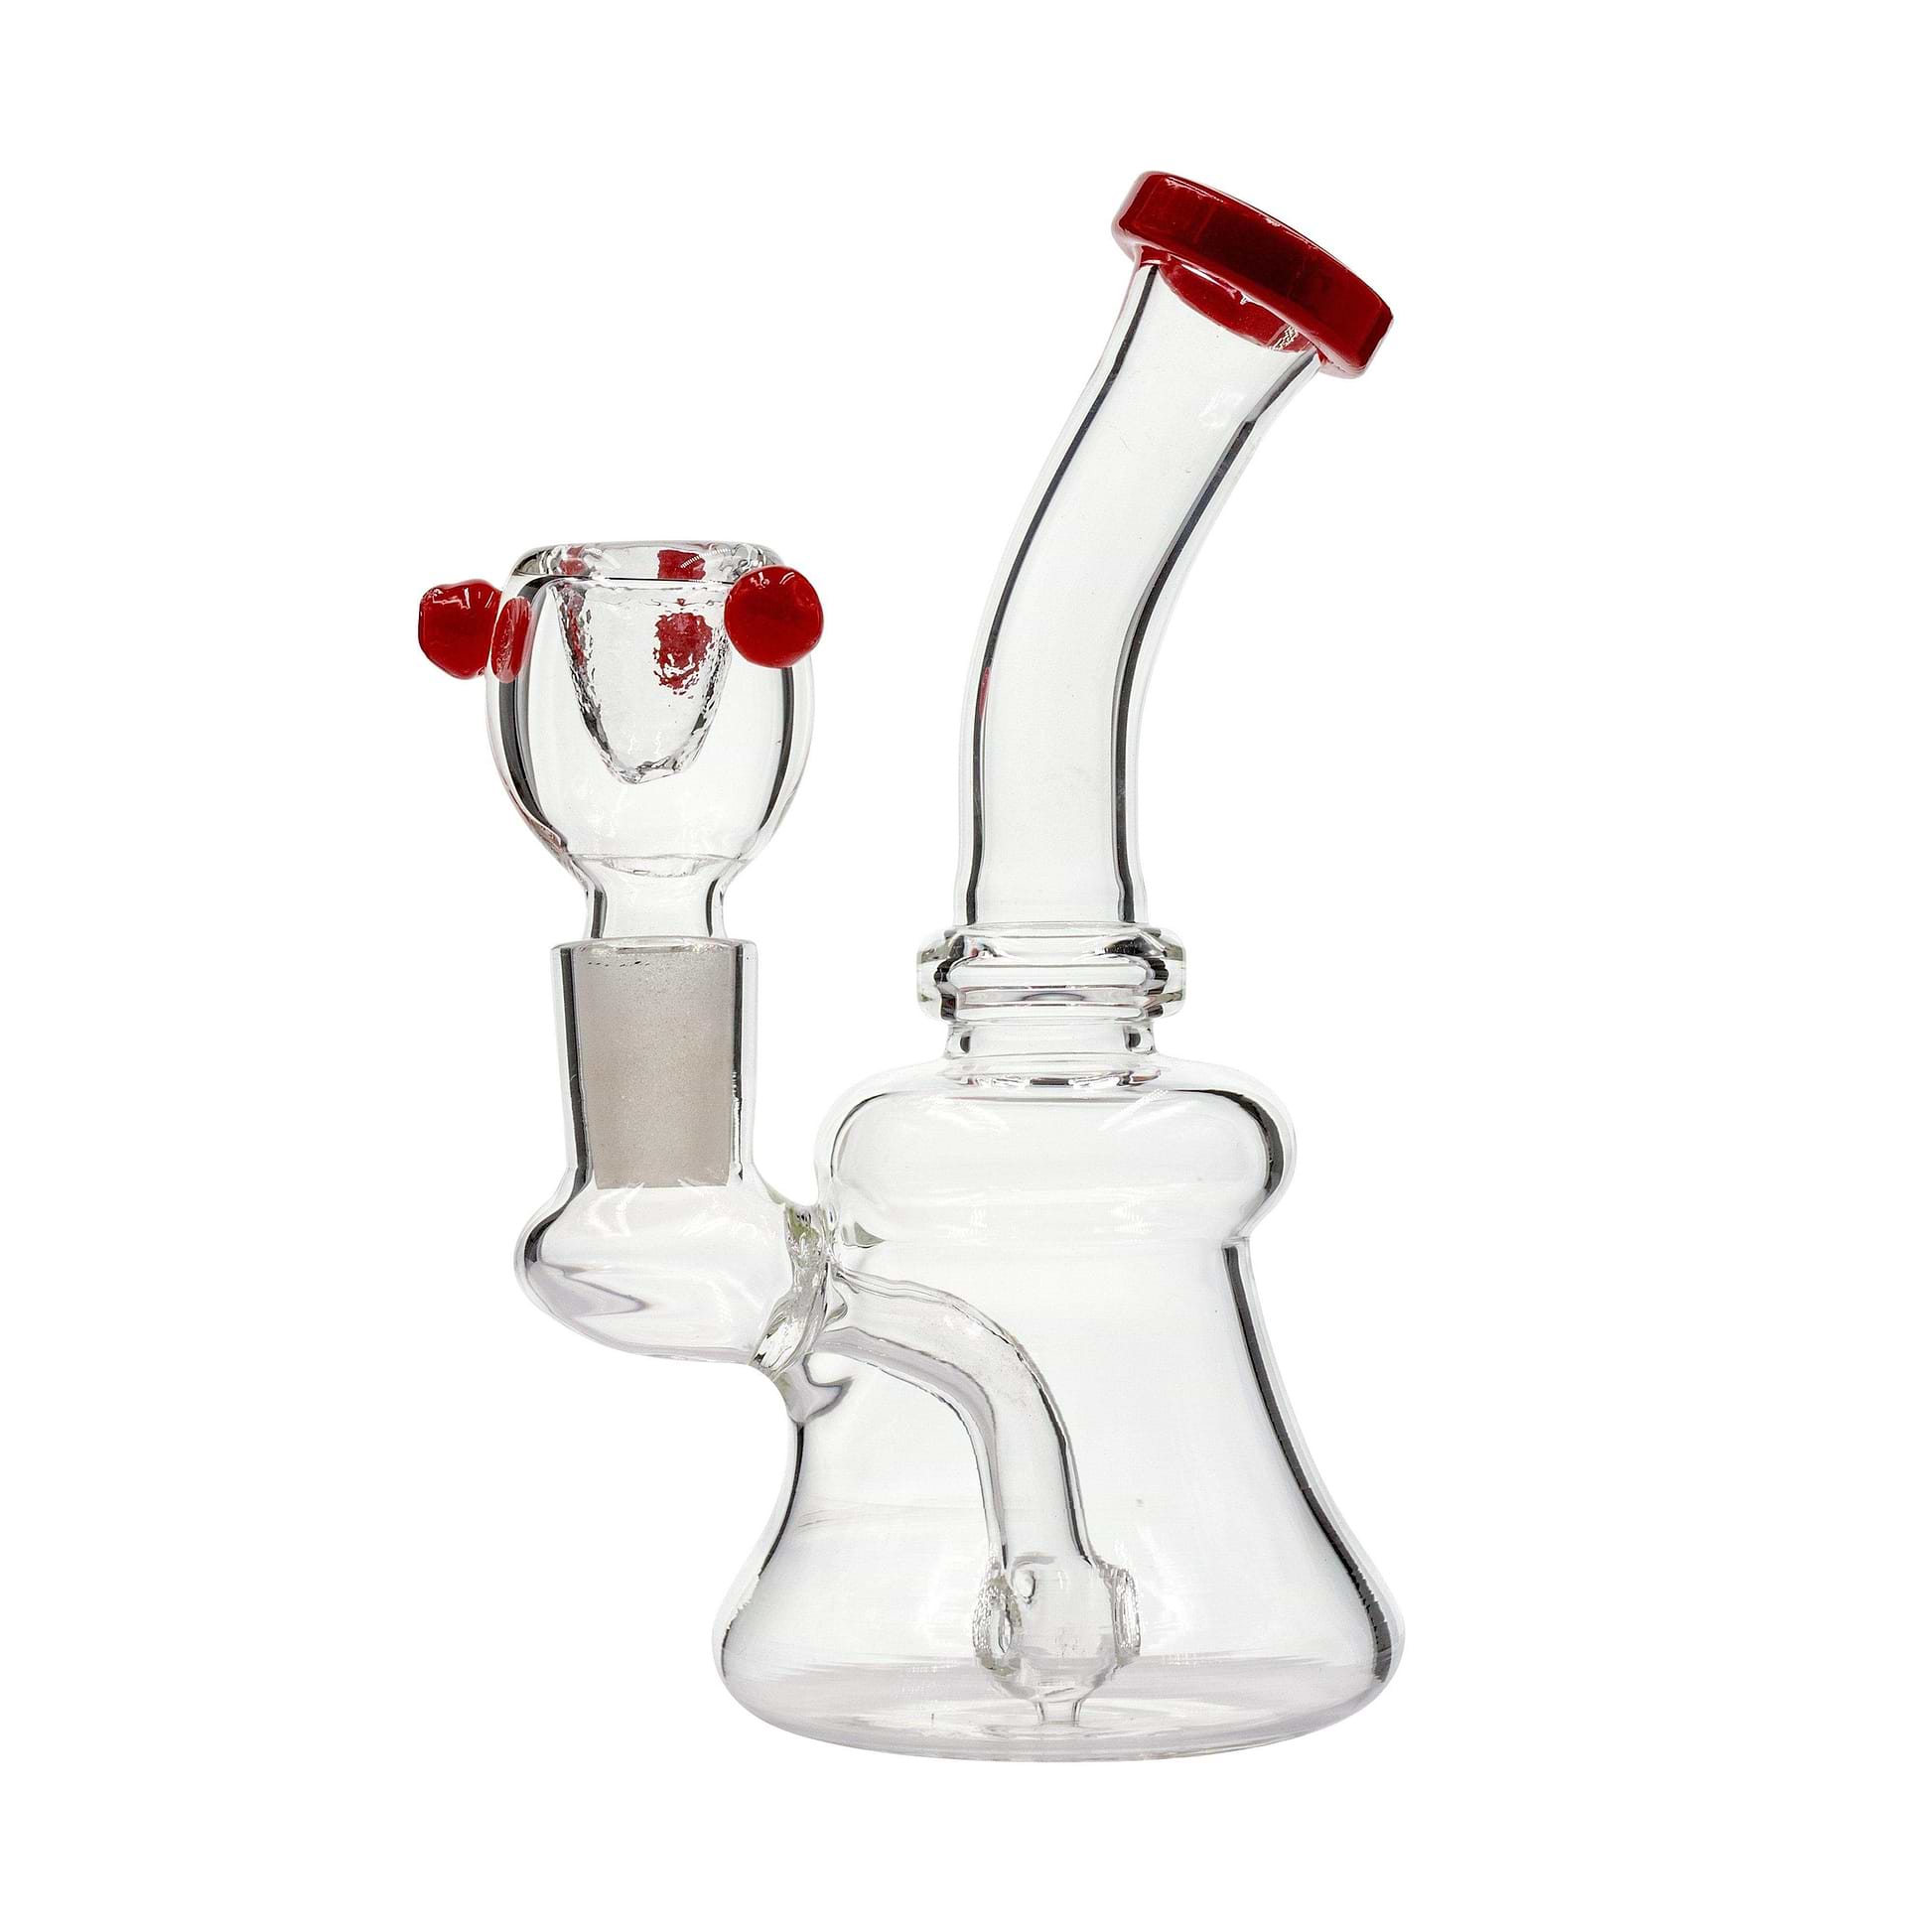 5.5-inch mini glass bong smoking device beaker style sturdy base with finger grips